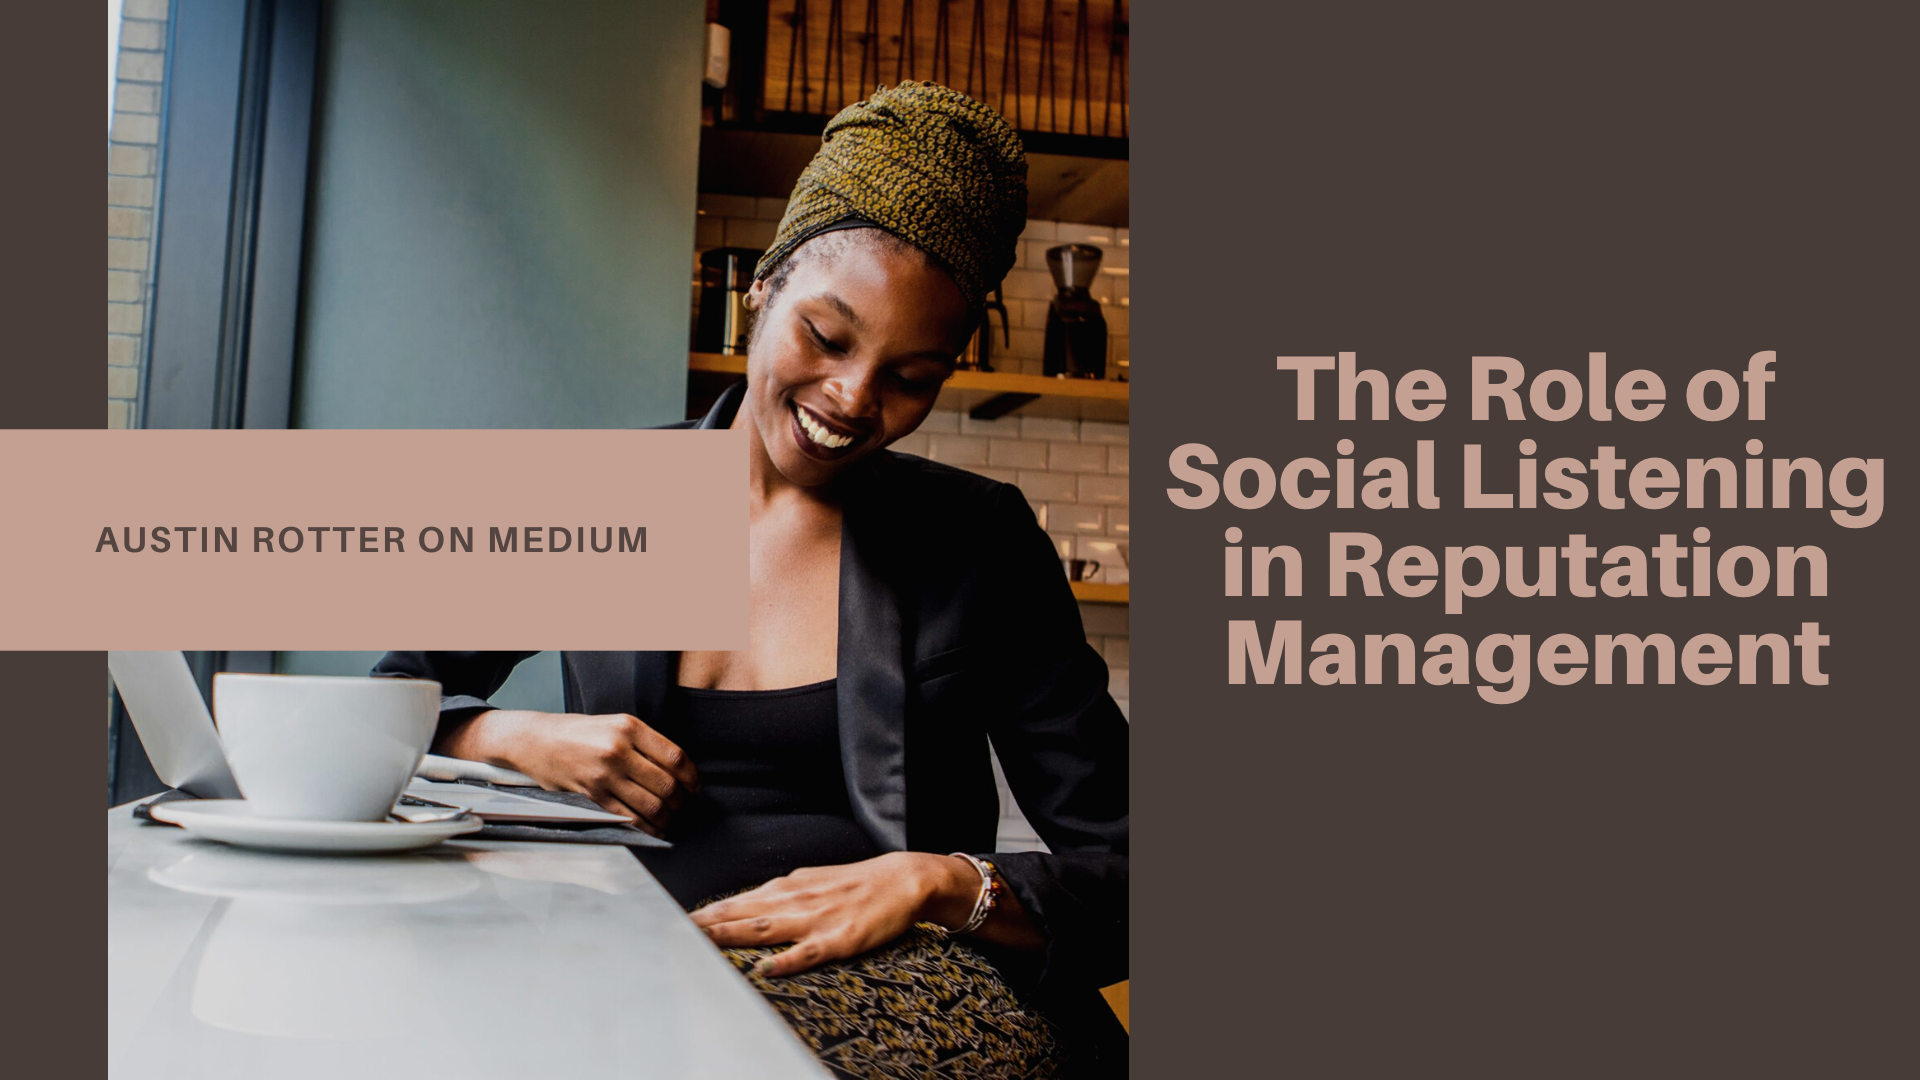 The Role of

— Social Listening

in Reputation
Management